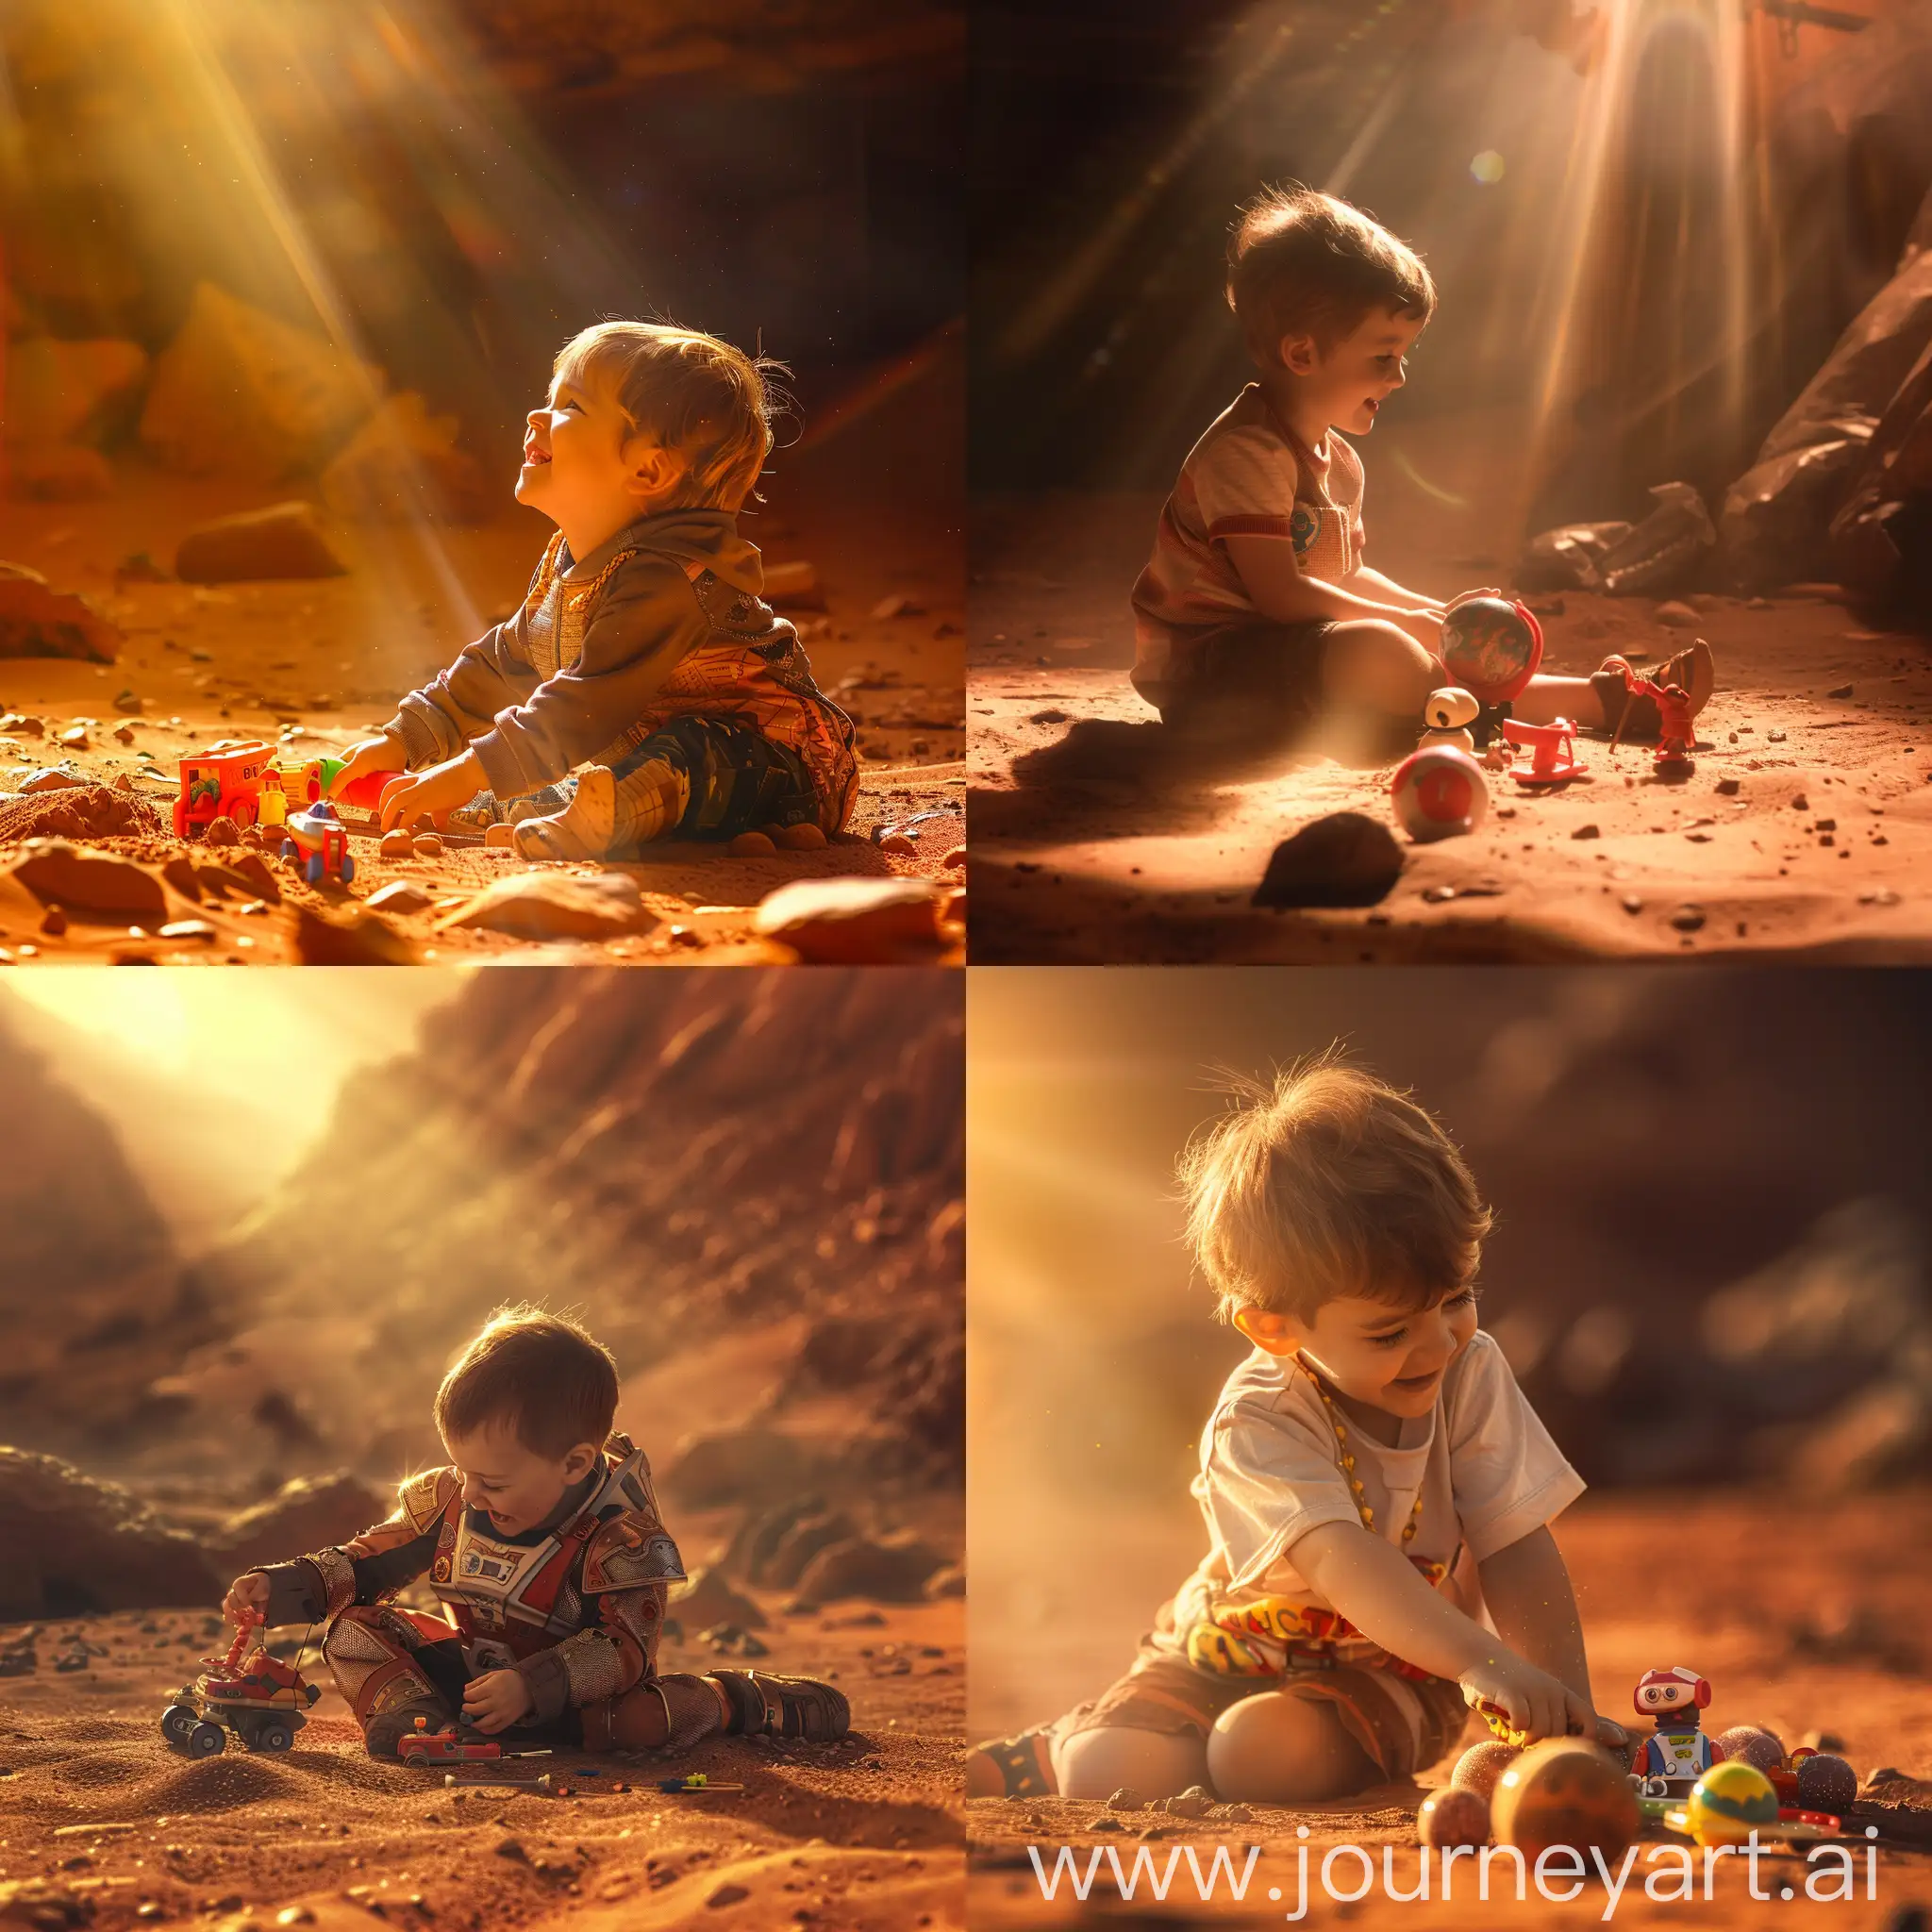 Exceptional moment the most beautiful happy   kid  ever playing with his toys on Mars iin the sunlight 1000 years from now.